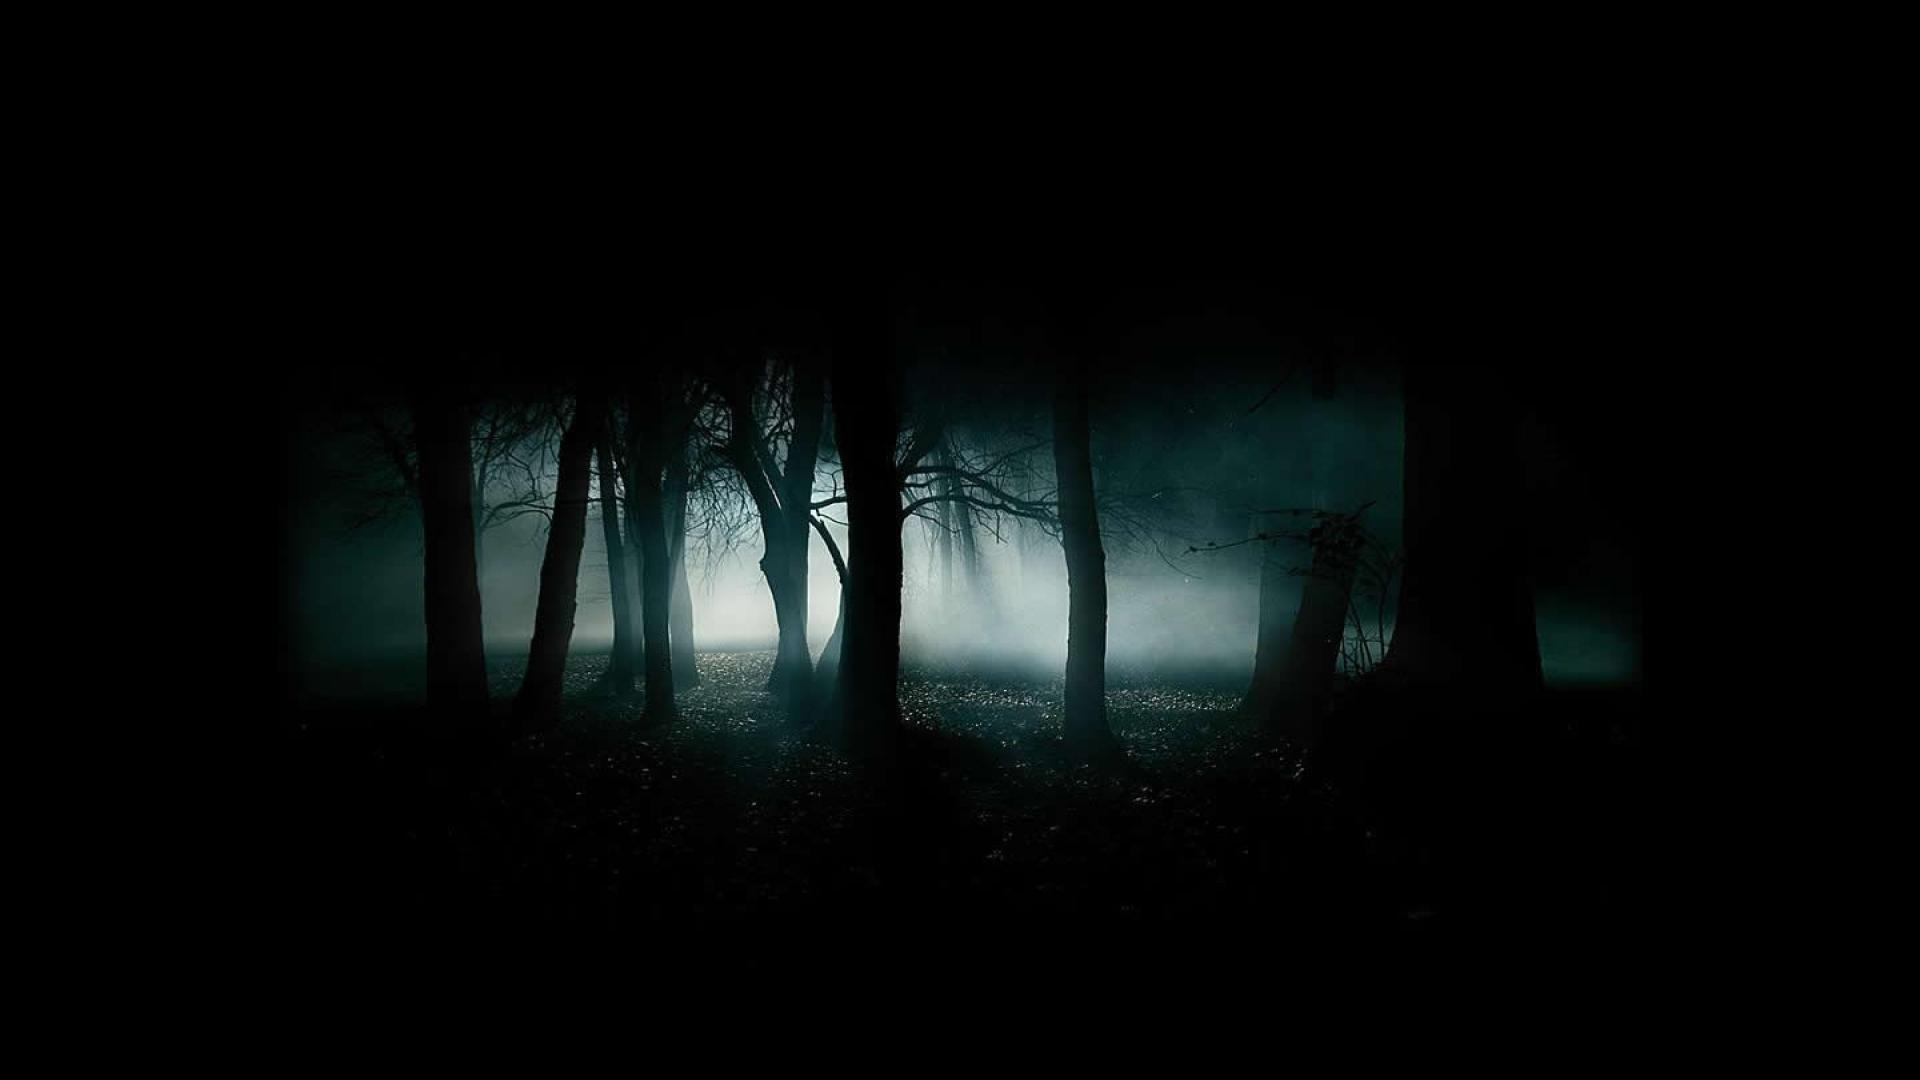 10 Best Scary Desktop Backgrounds Hd FULL HD 1080p For PC Background